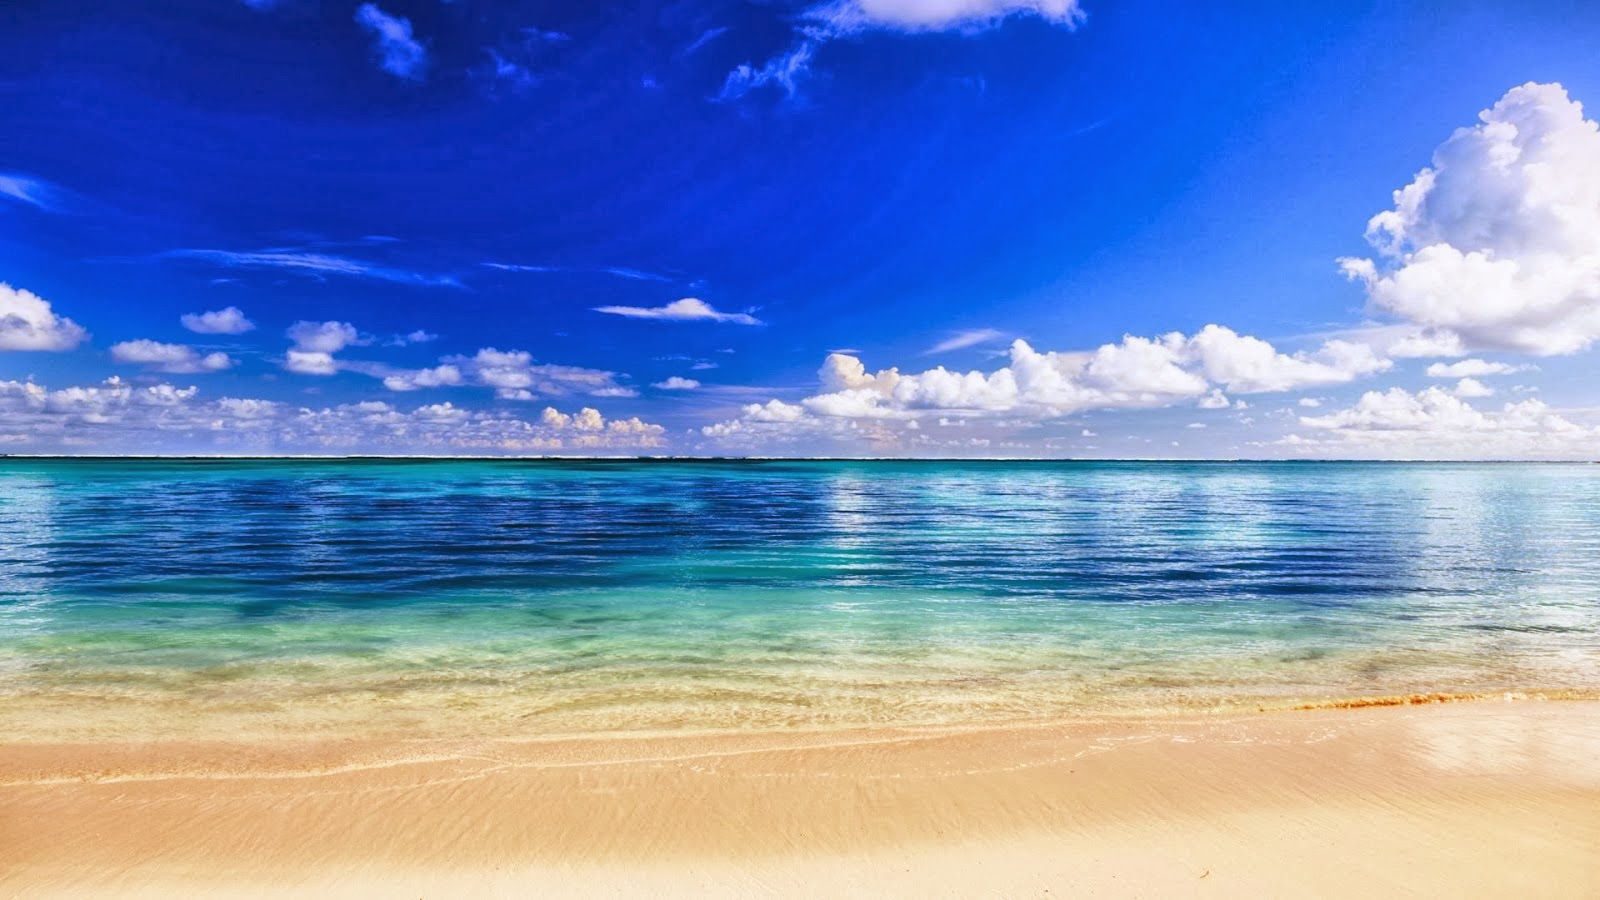  hd wallpapers 1080p blue water white sand beach hd wallpapers 1080p